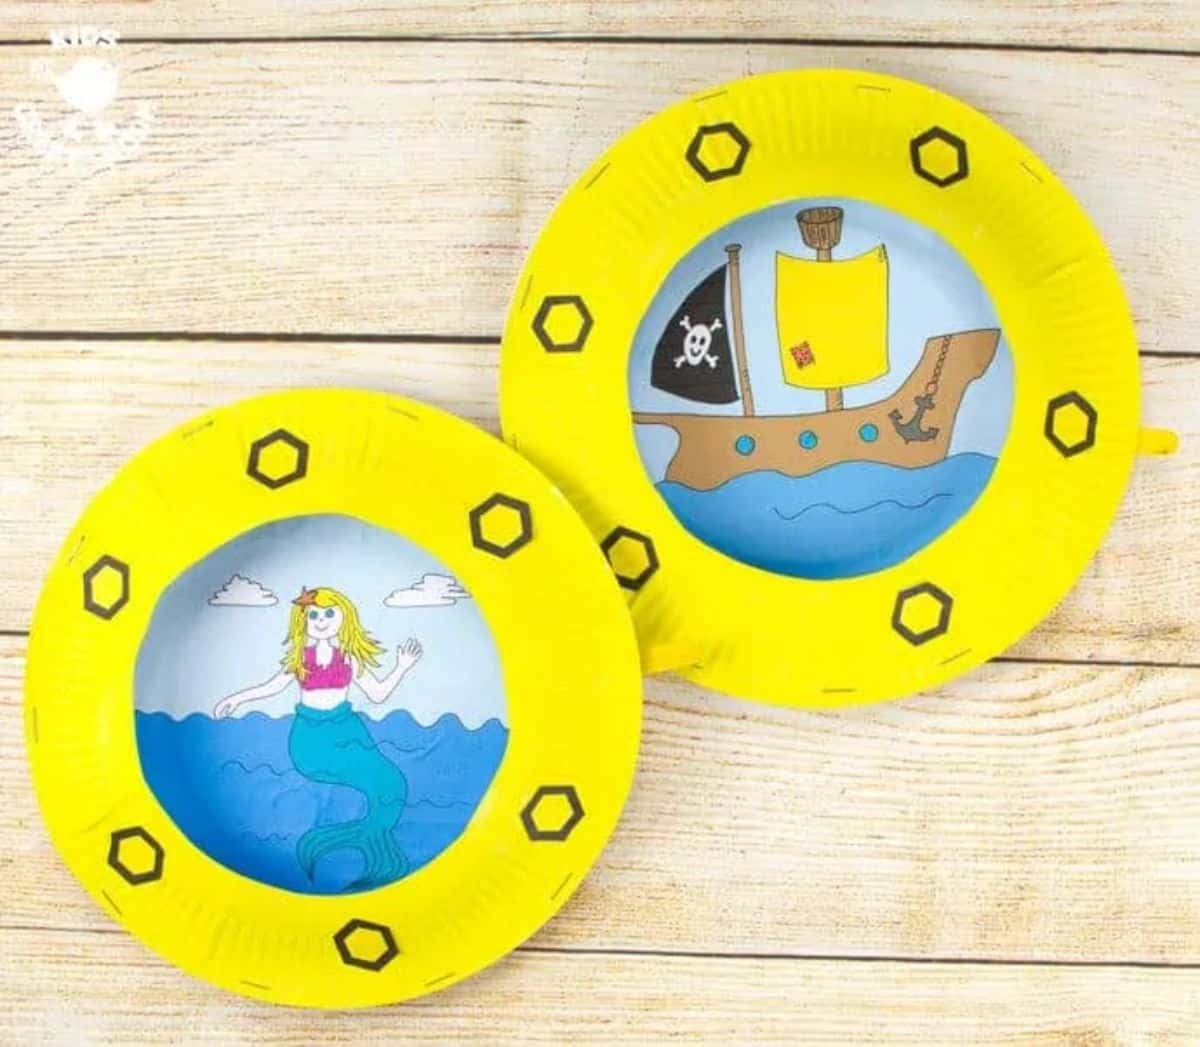 Papaer plate porthole craft on a wooden table.